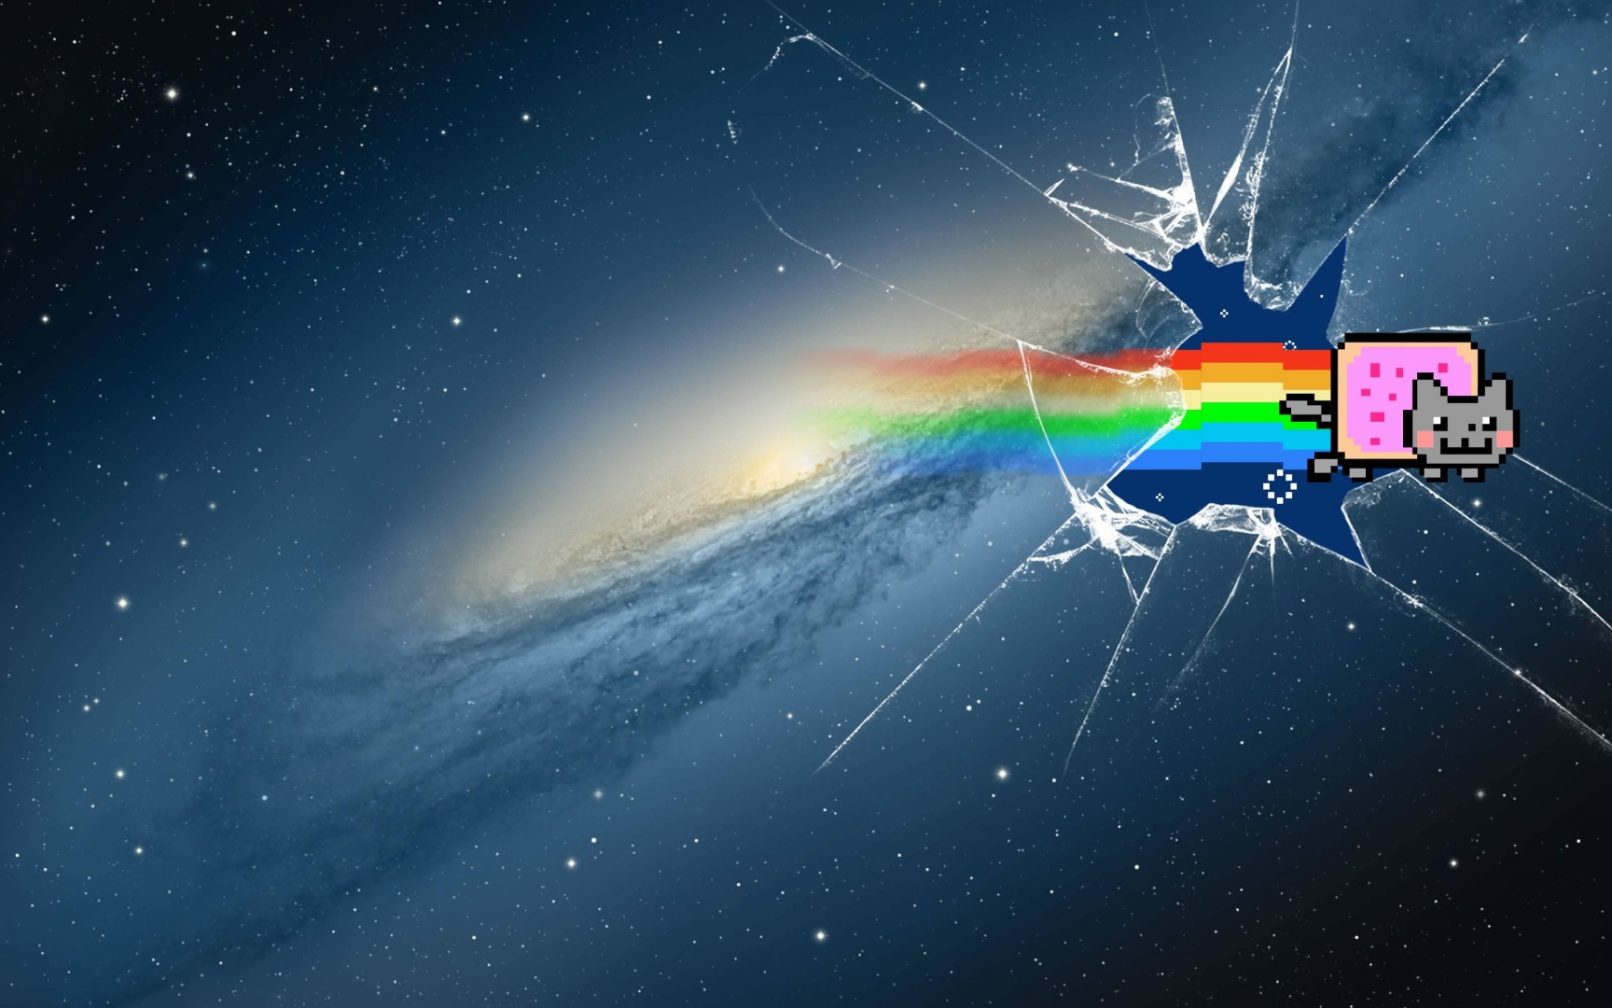 nyan cat zoom background video